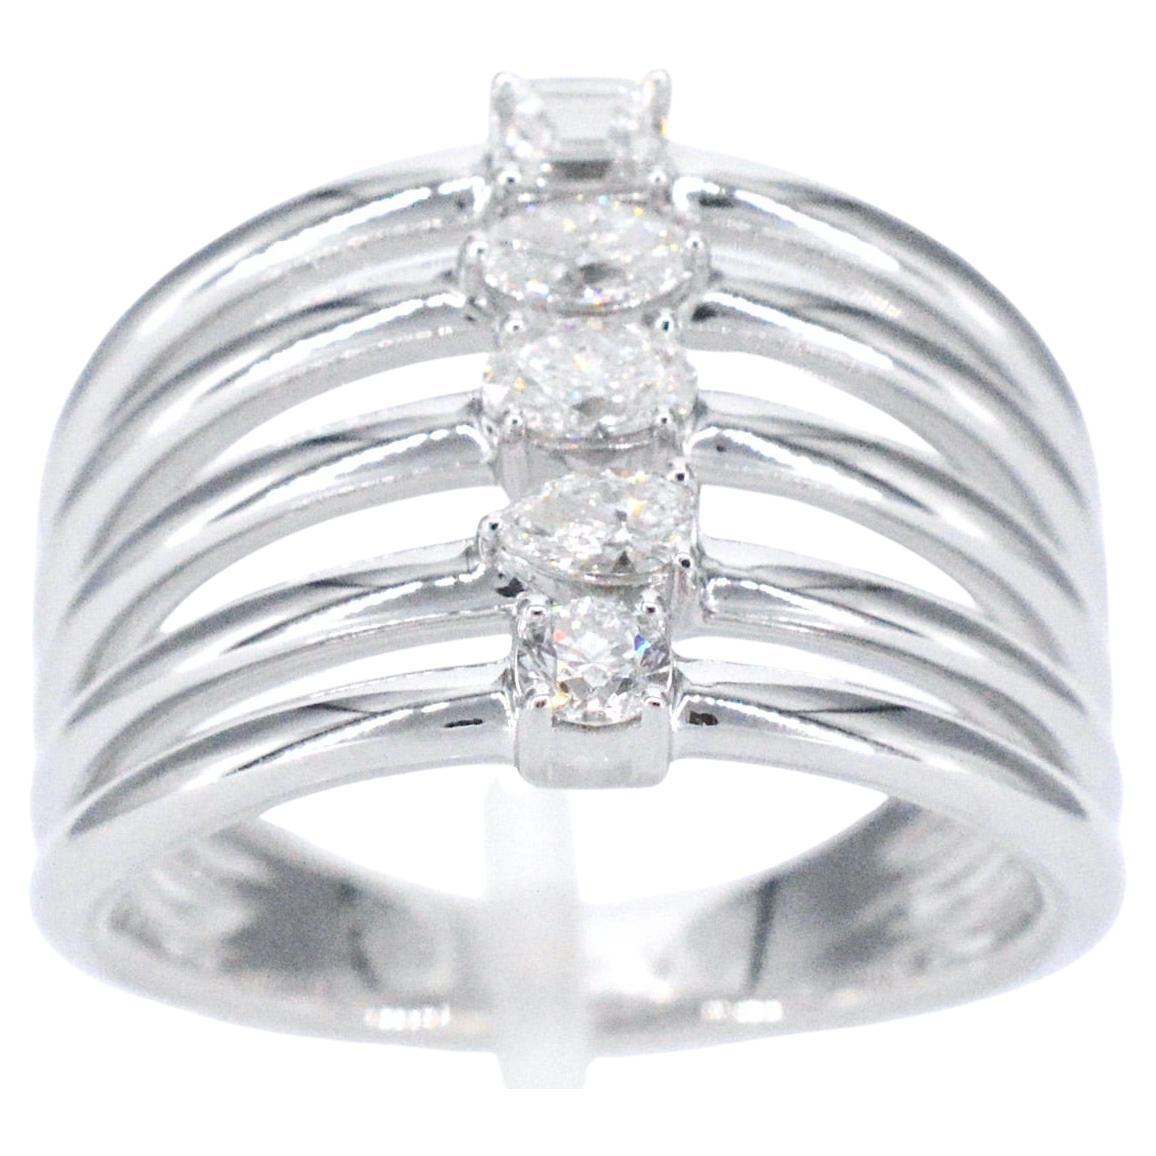 White Gold Ring with 5 Special Diamonds